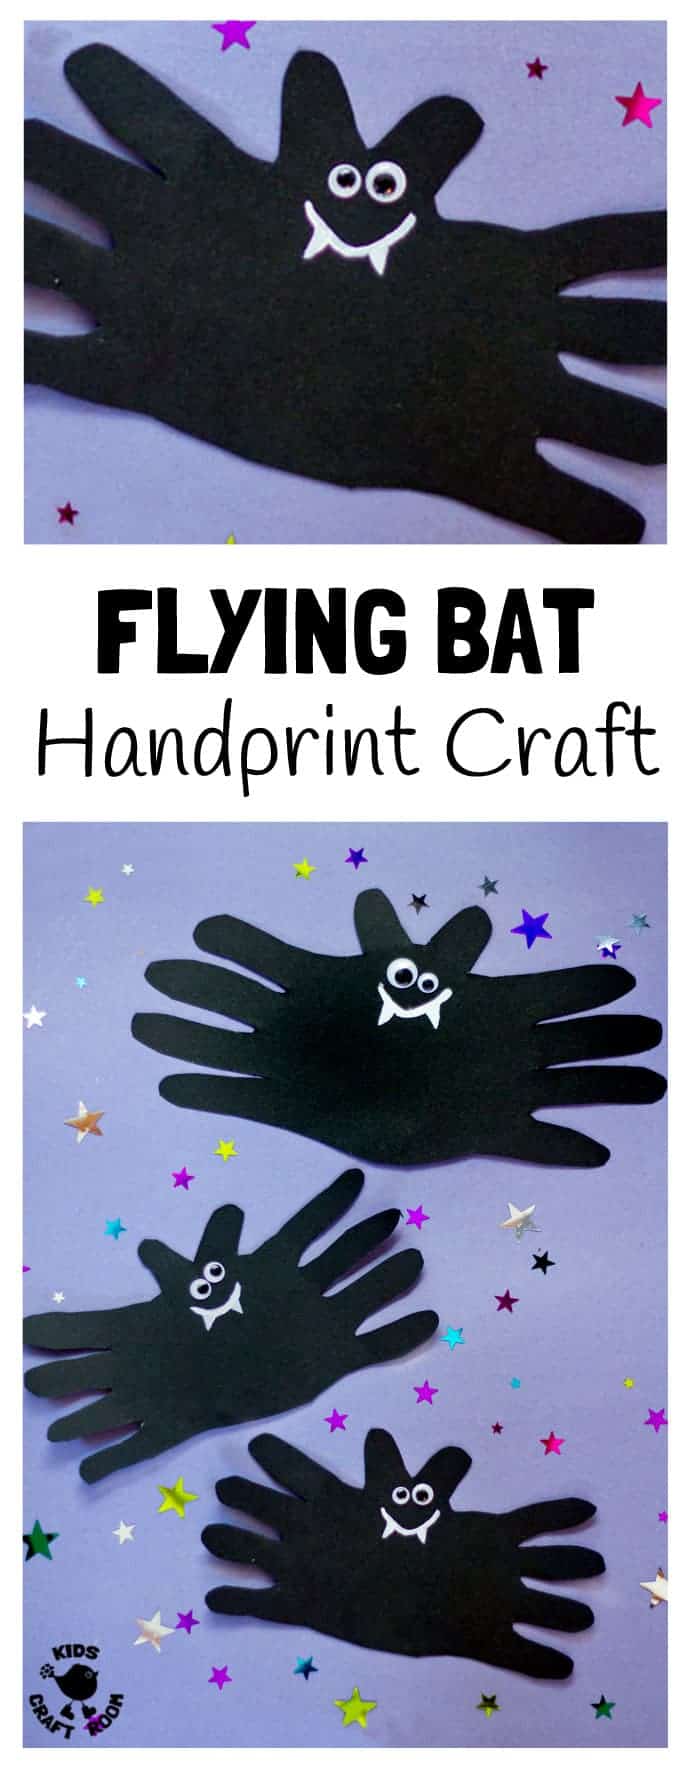 A cute and cheeky HALLOWEEN BAT HANDPRINT CRAFT for kids. Great Halloween craft party decoration or for sticking on greeting cards. Add some elastic and turn your bat craft into a flying bat toy for kids to play with!